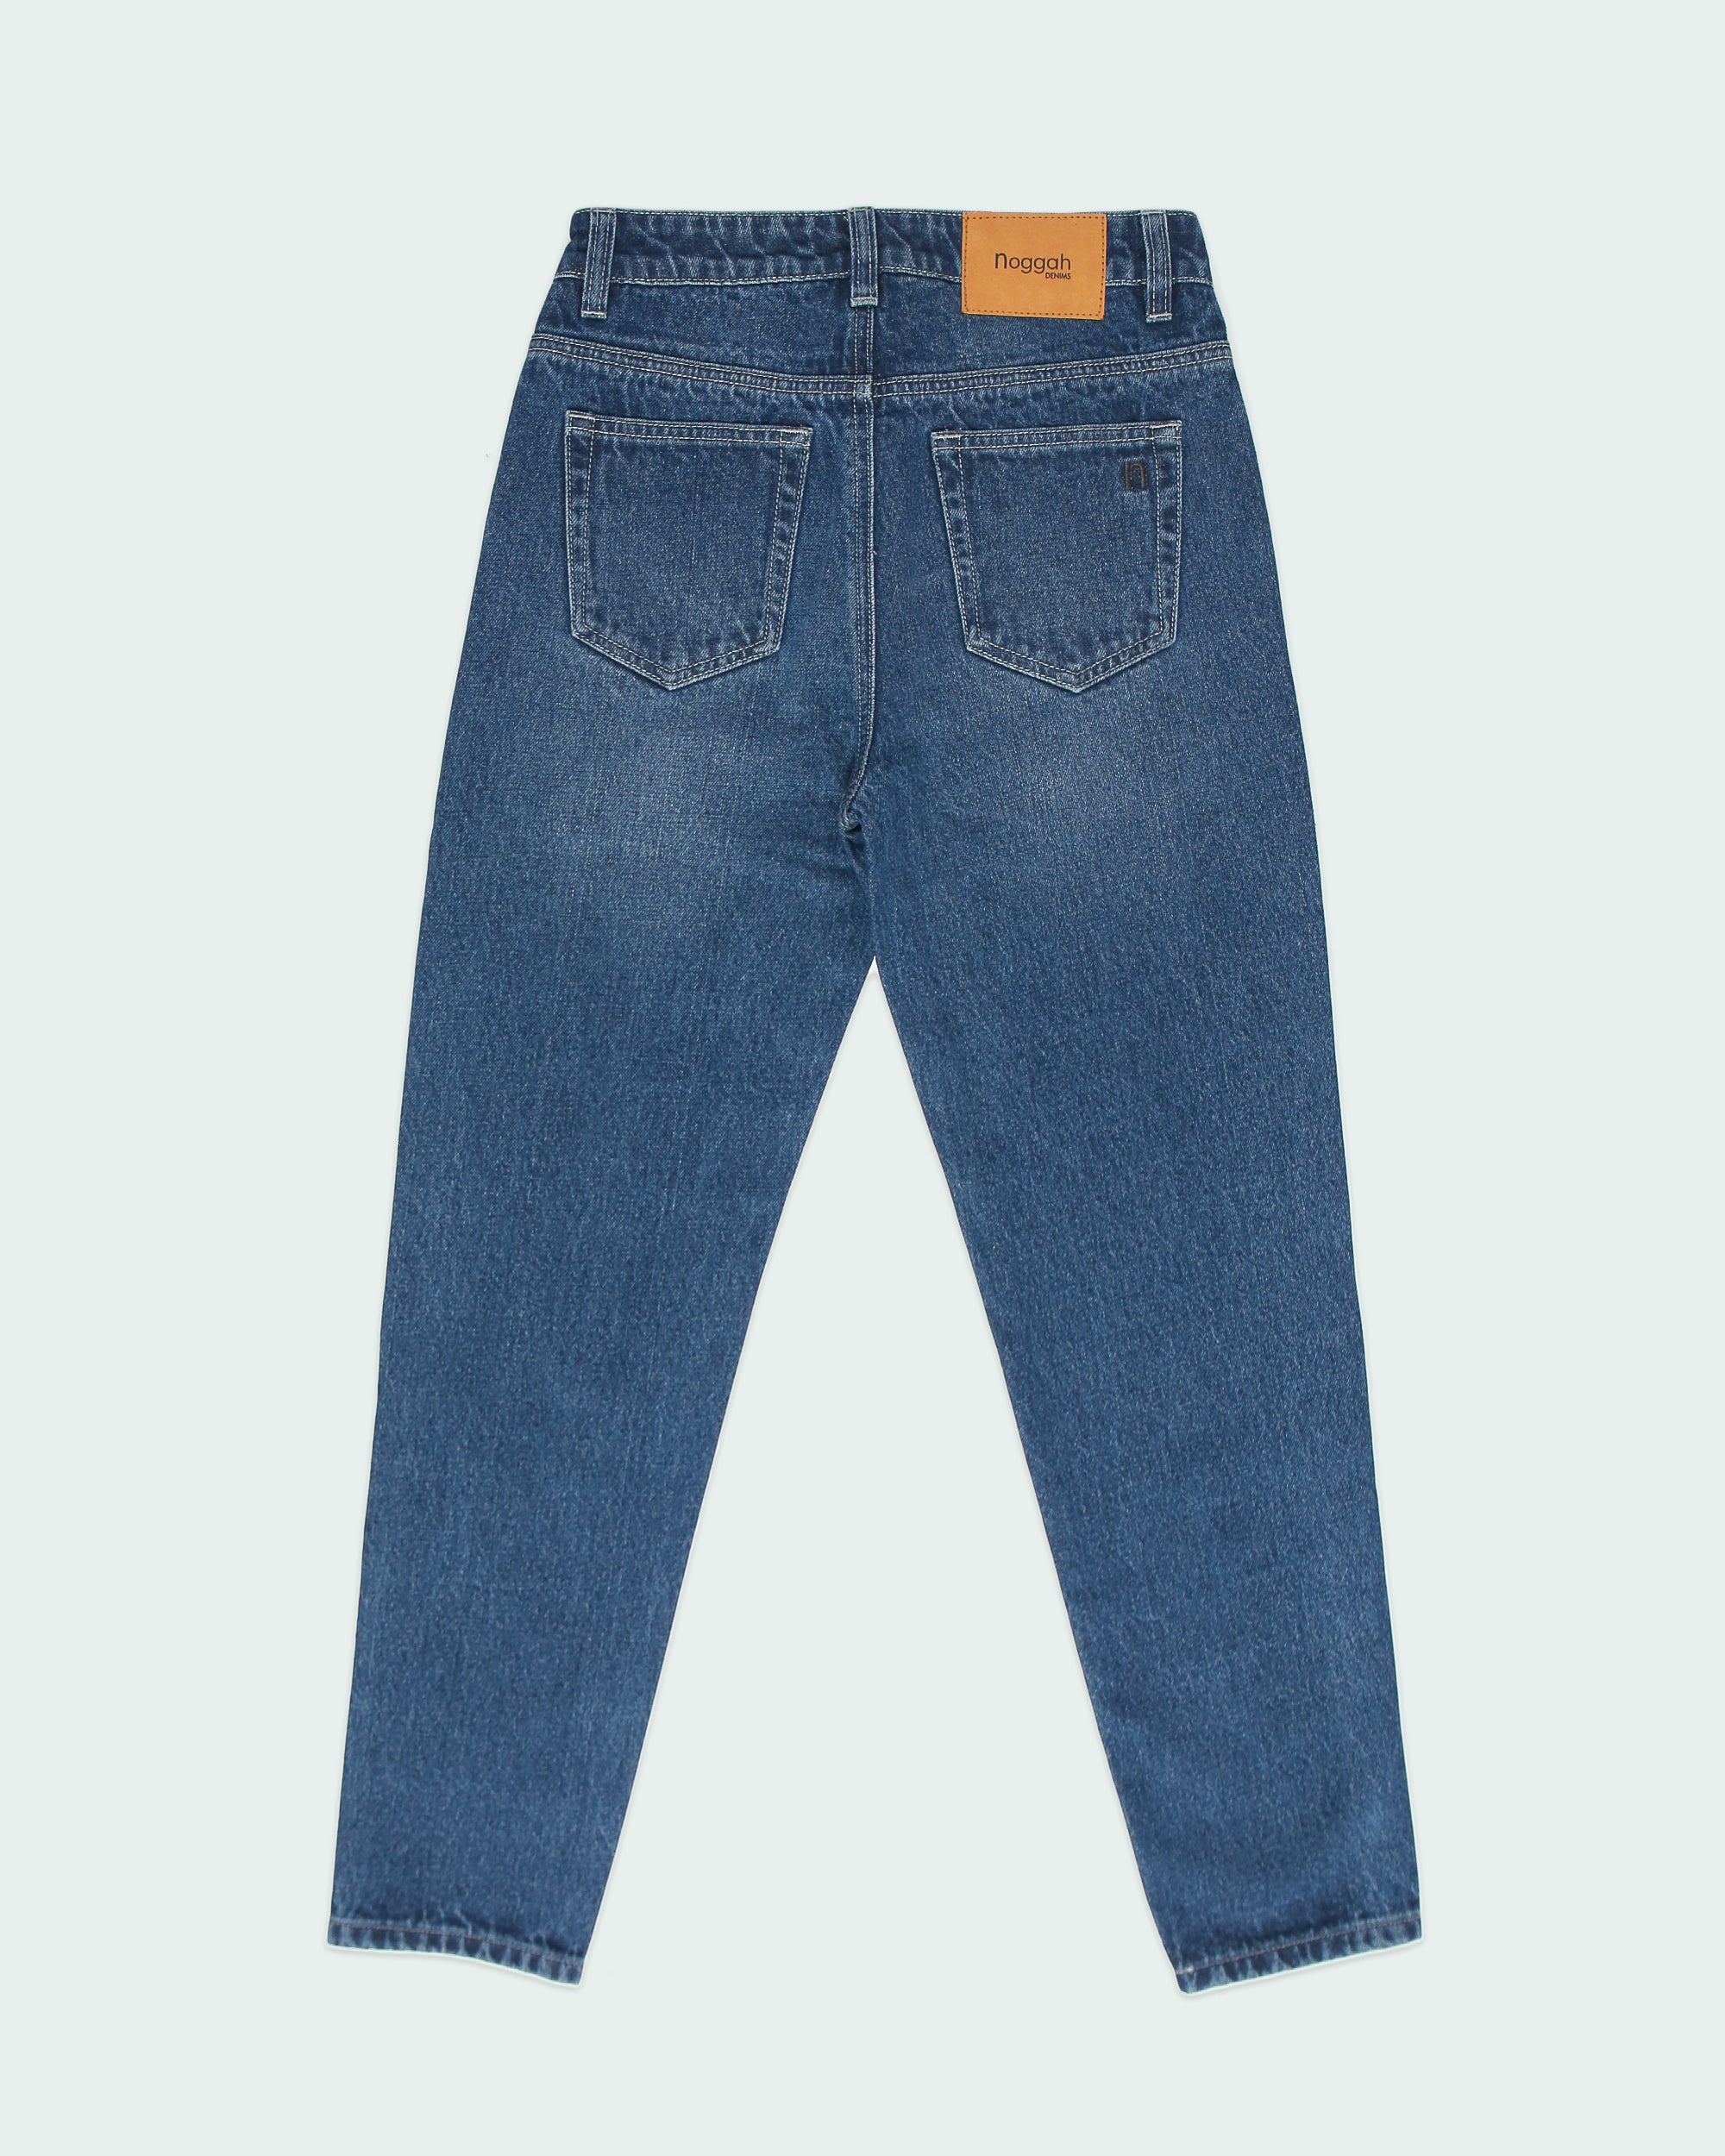 Buy women jeans joggers under 500 in India @ Limeroad